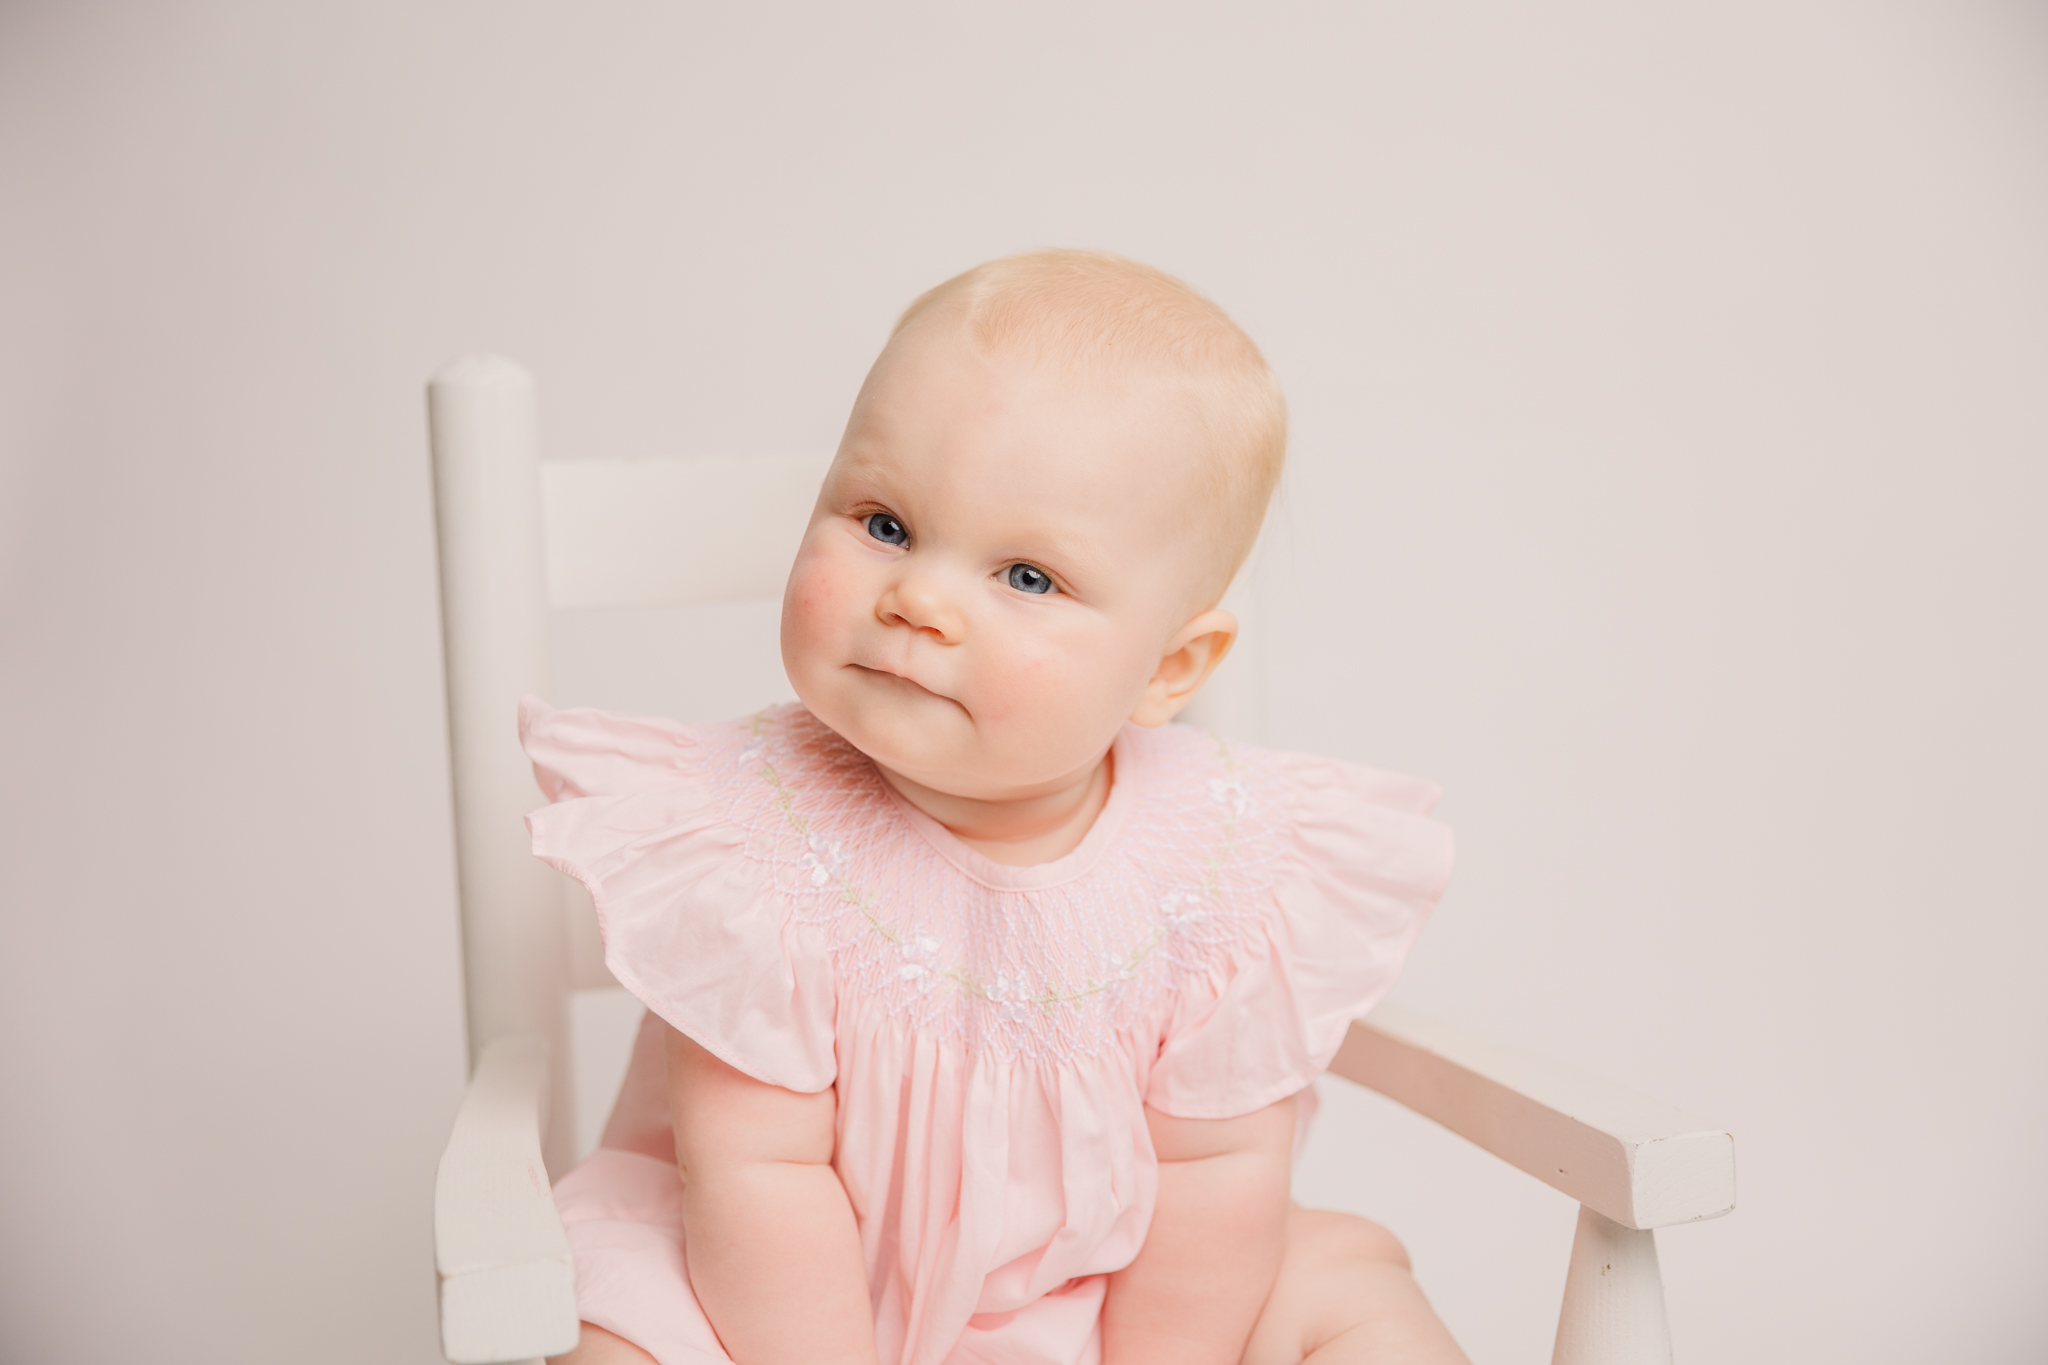 Six month old milestone session captured in the studio by Molly Berry Photography